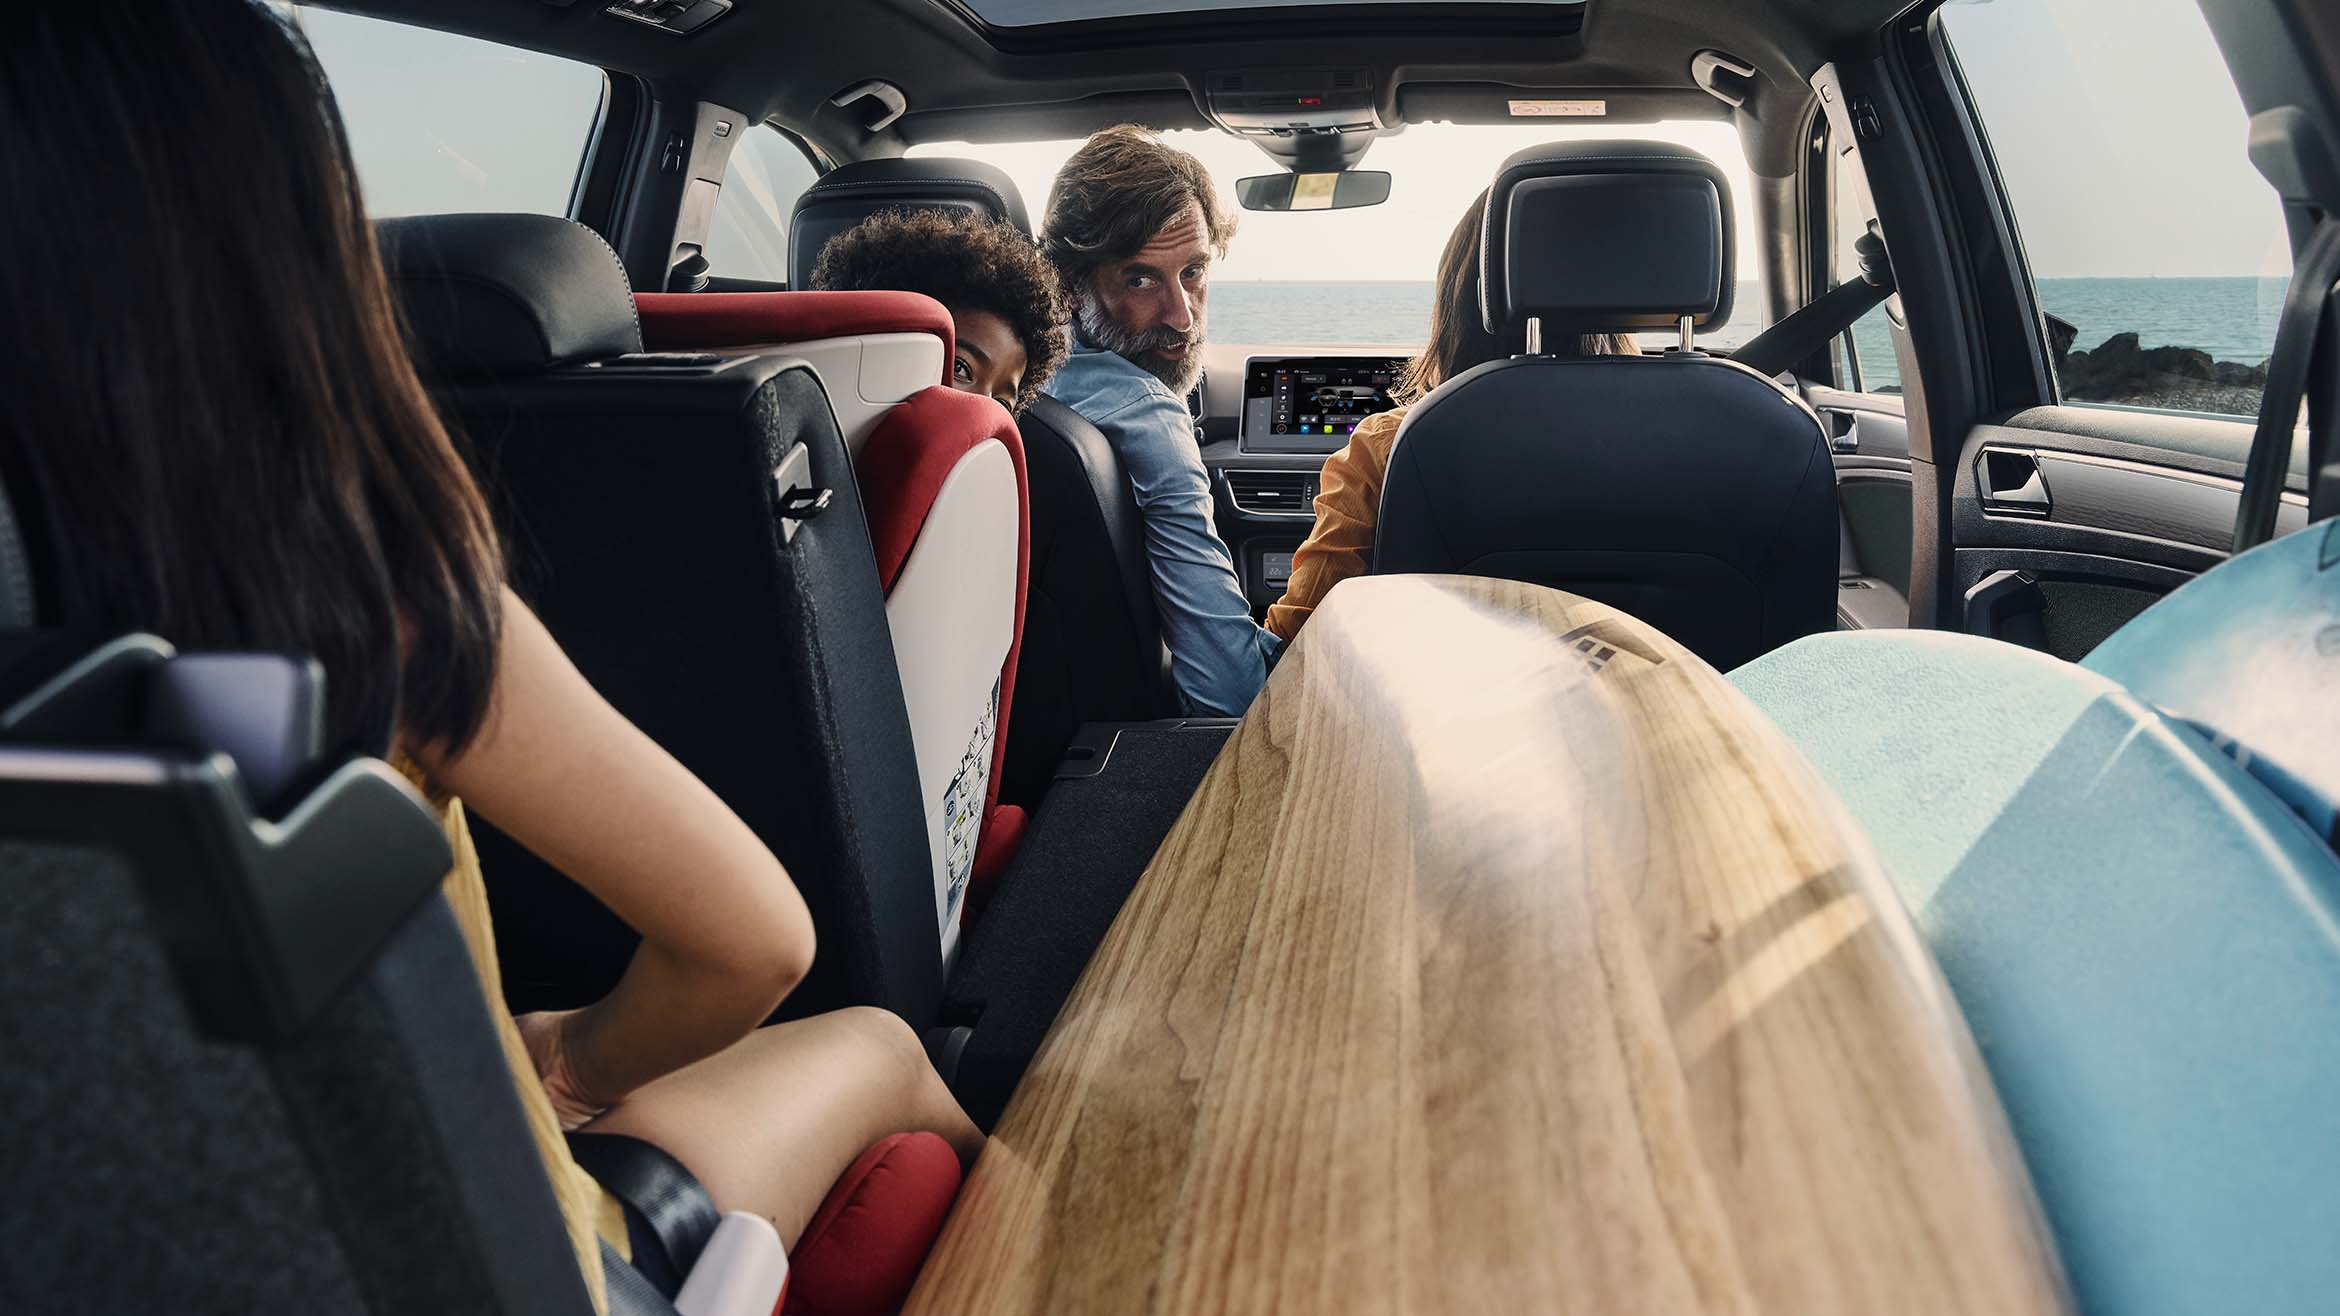 The SEAT Tarraco XPERIENCE with family in car